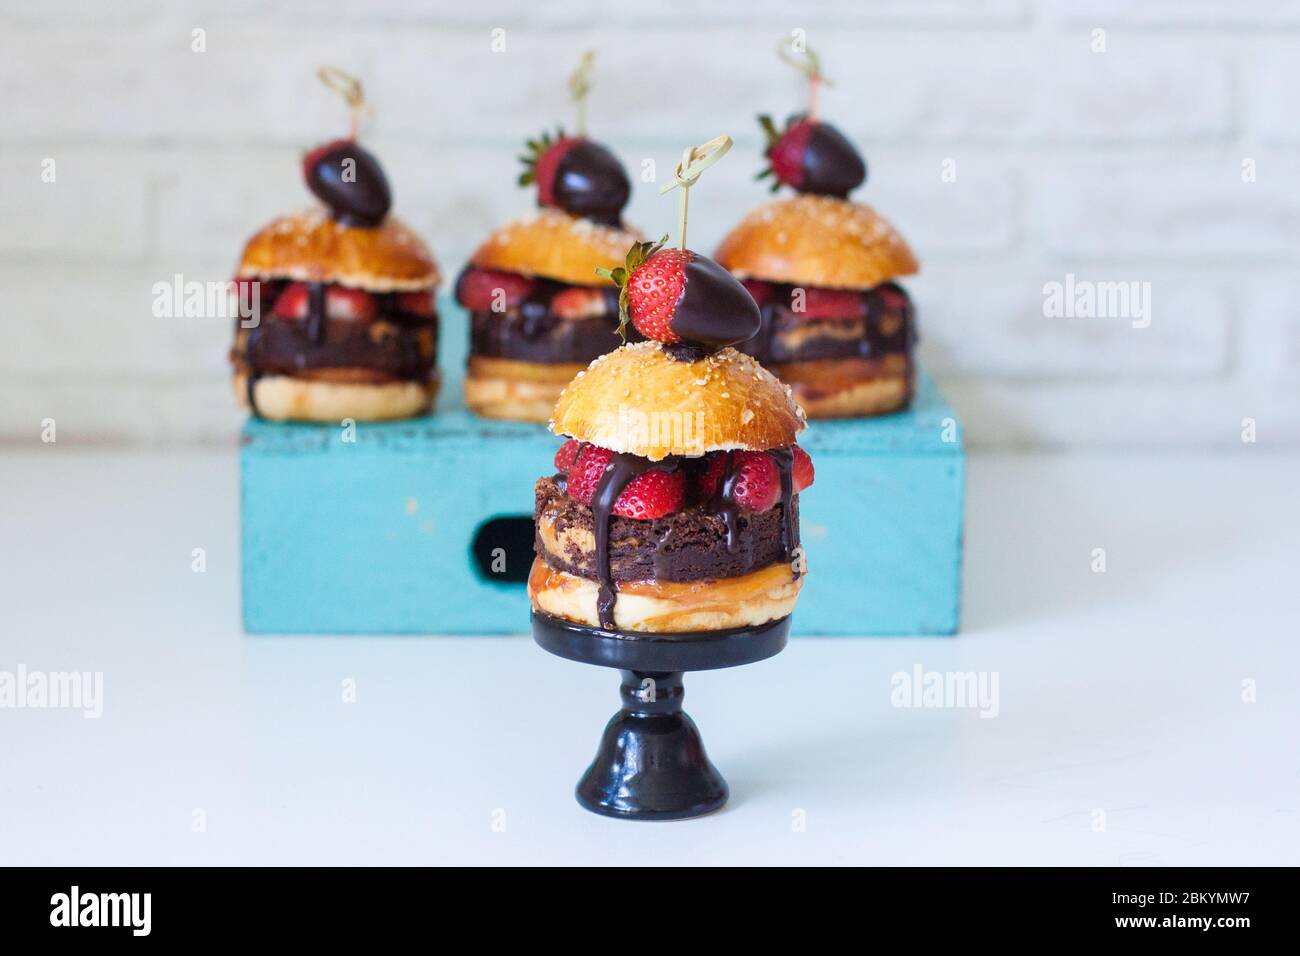 Sweet burger with vanilla bun, brownie layer, strawberries in chocolate and salted caramel. Stock Photo